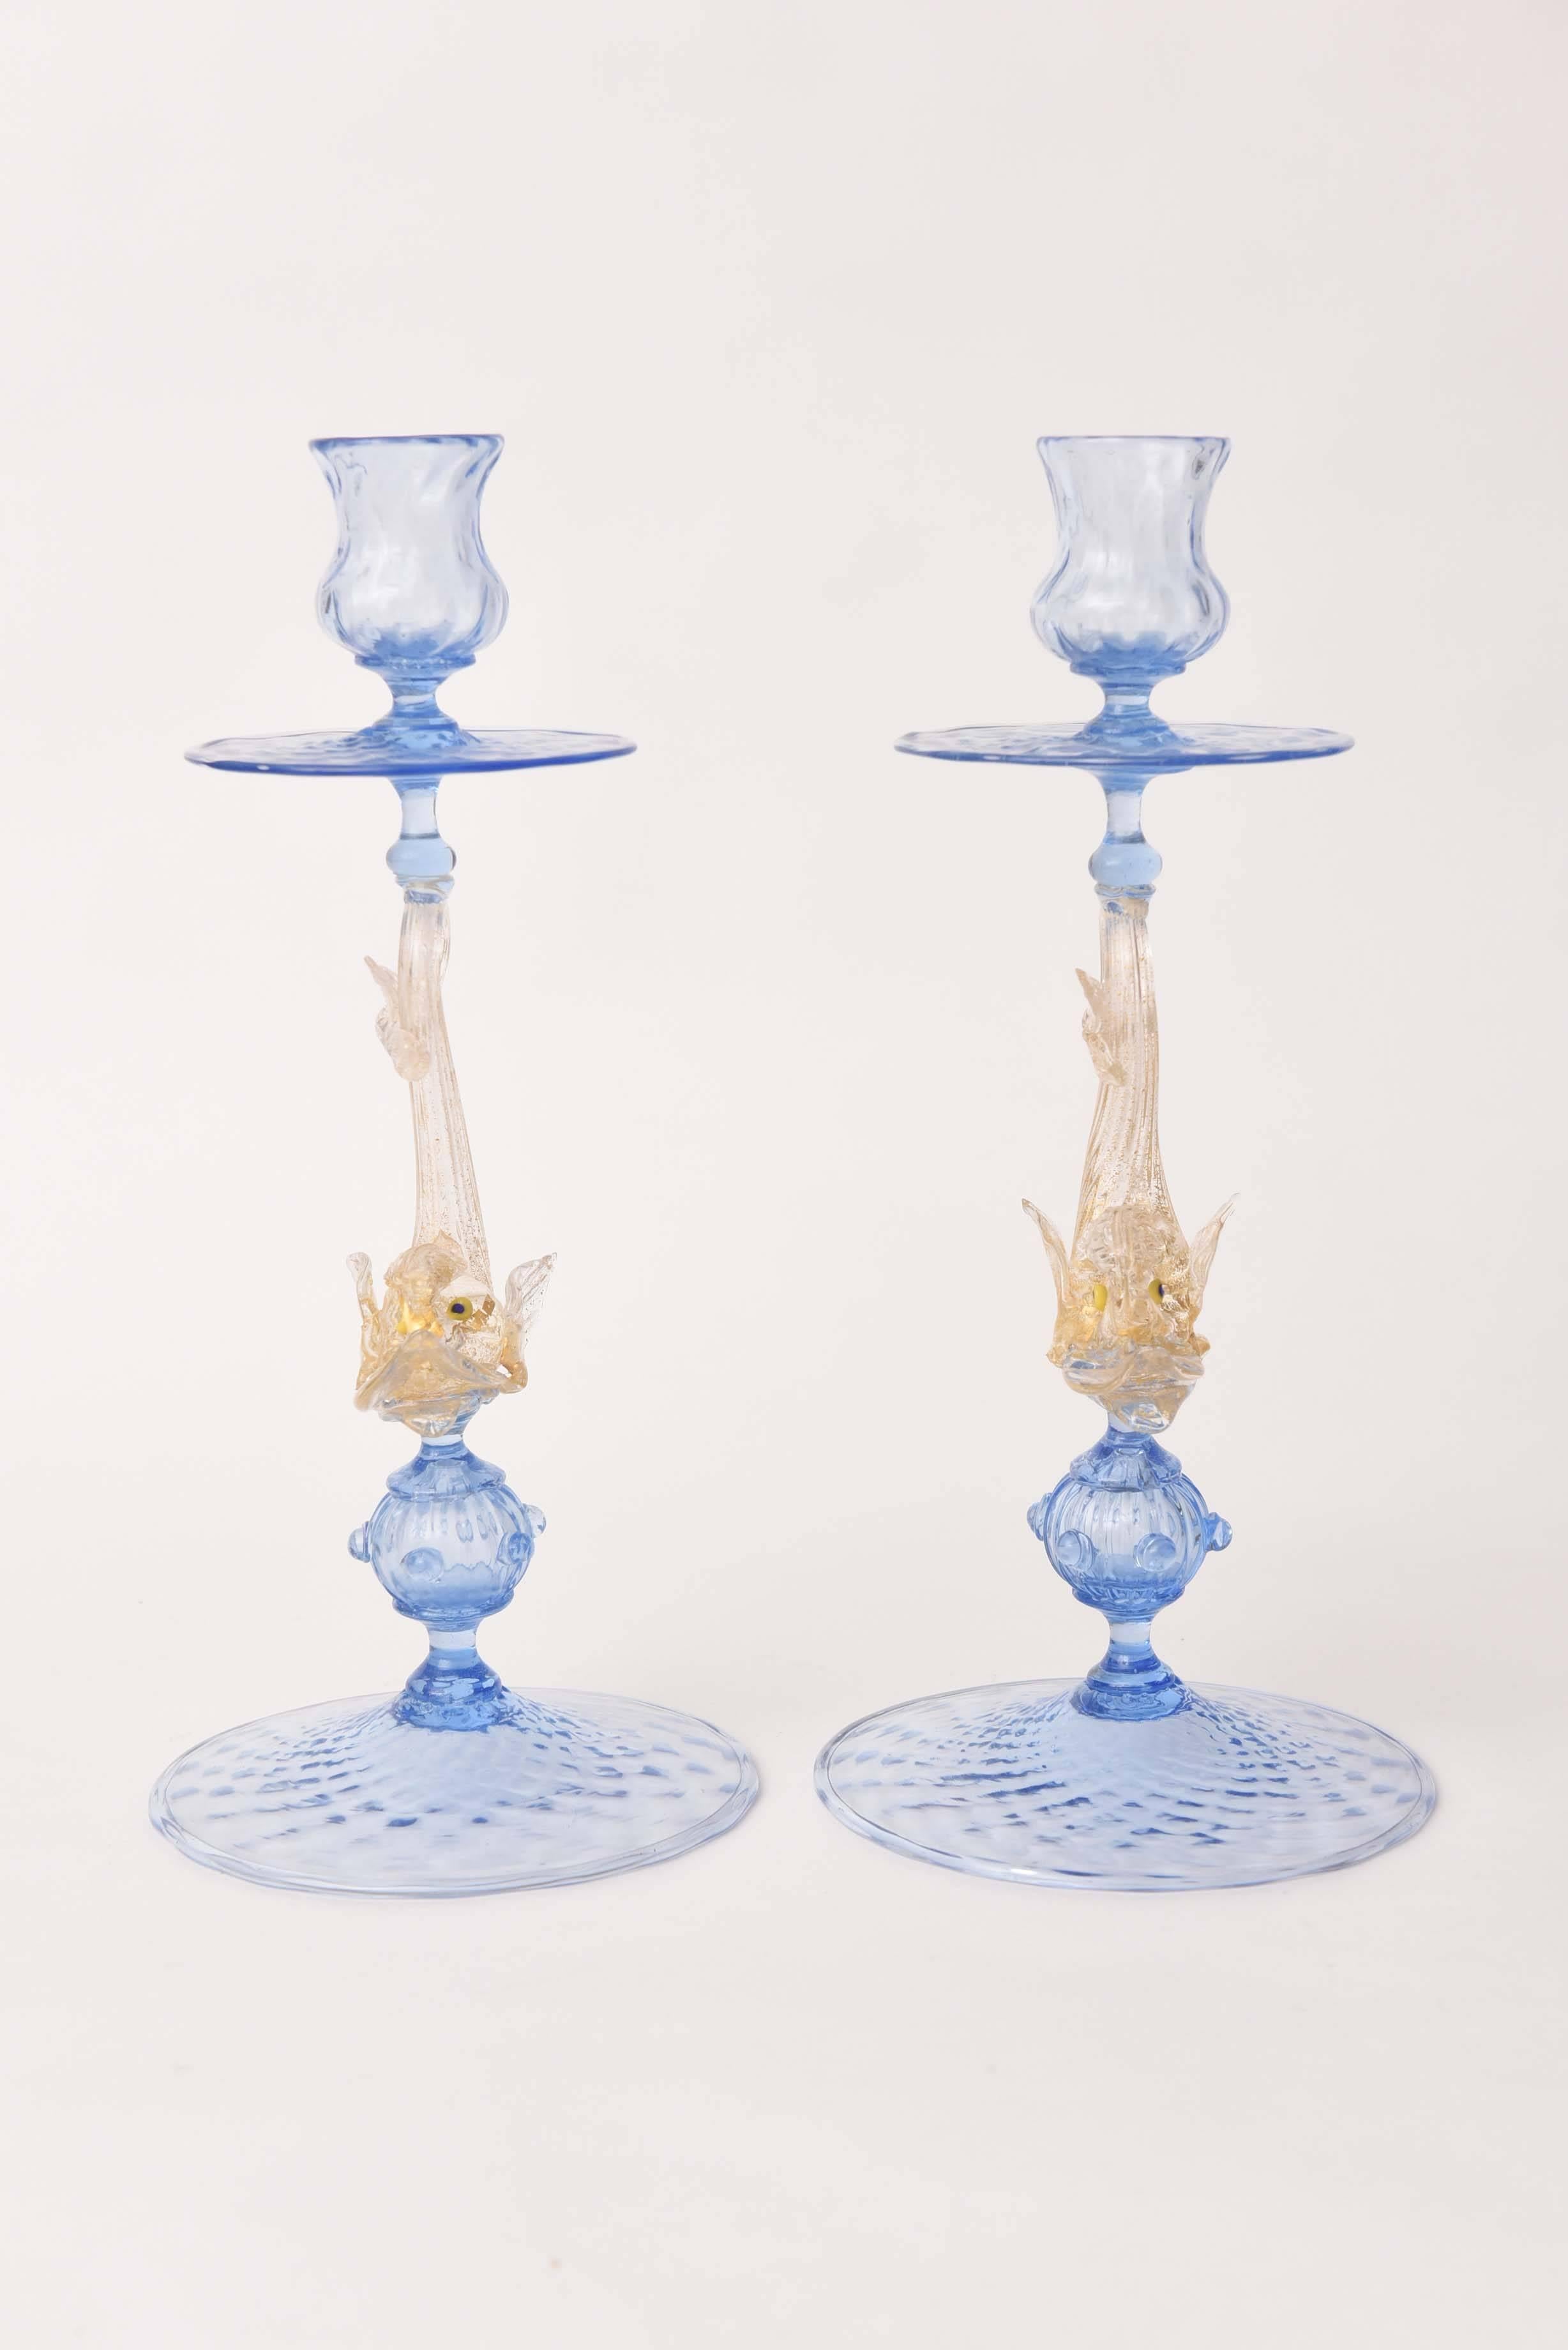 A whimsical and tall pair of Venetian glass candlesticks with a beautifully blown blue bobeche for the candles. Also featuring the Isle of Murano Classic dolphin centering its stem with 24-karat blown gold inclusion. The base features an extra globe